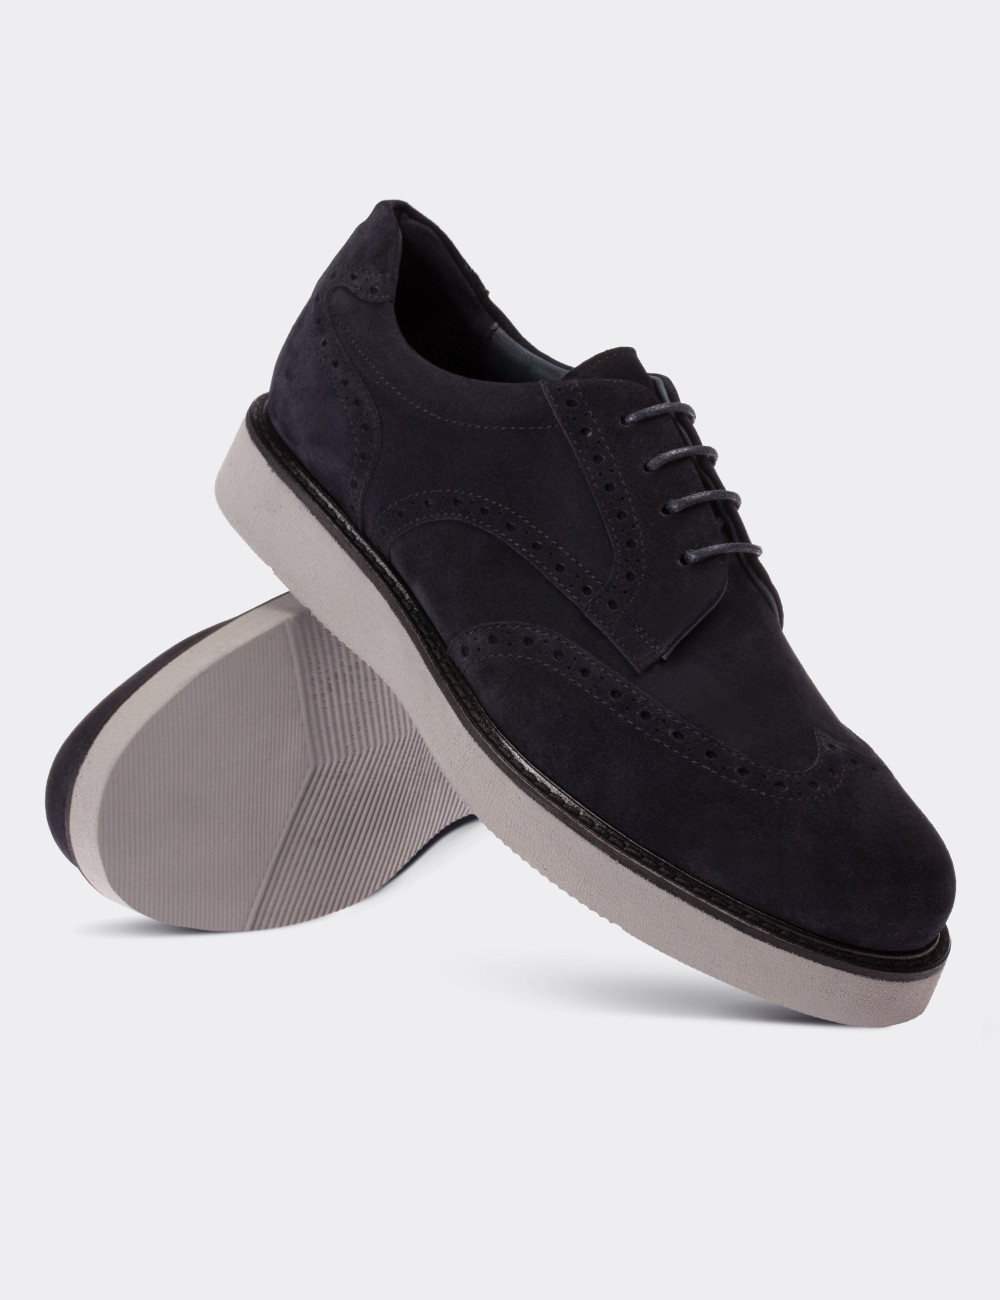 Navy Suede Leather Lace-up Shoes - 01691MLCVE01